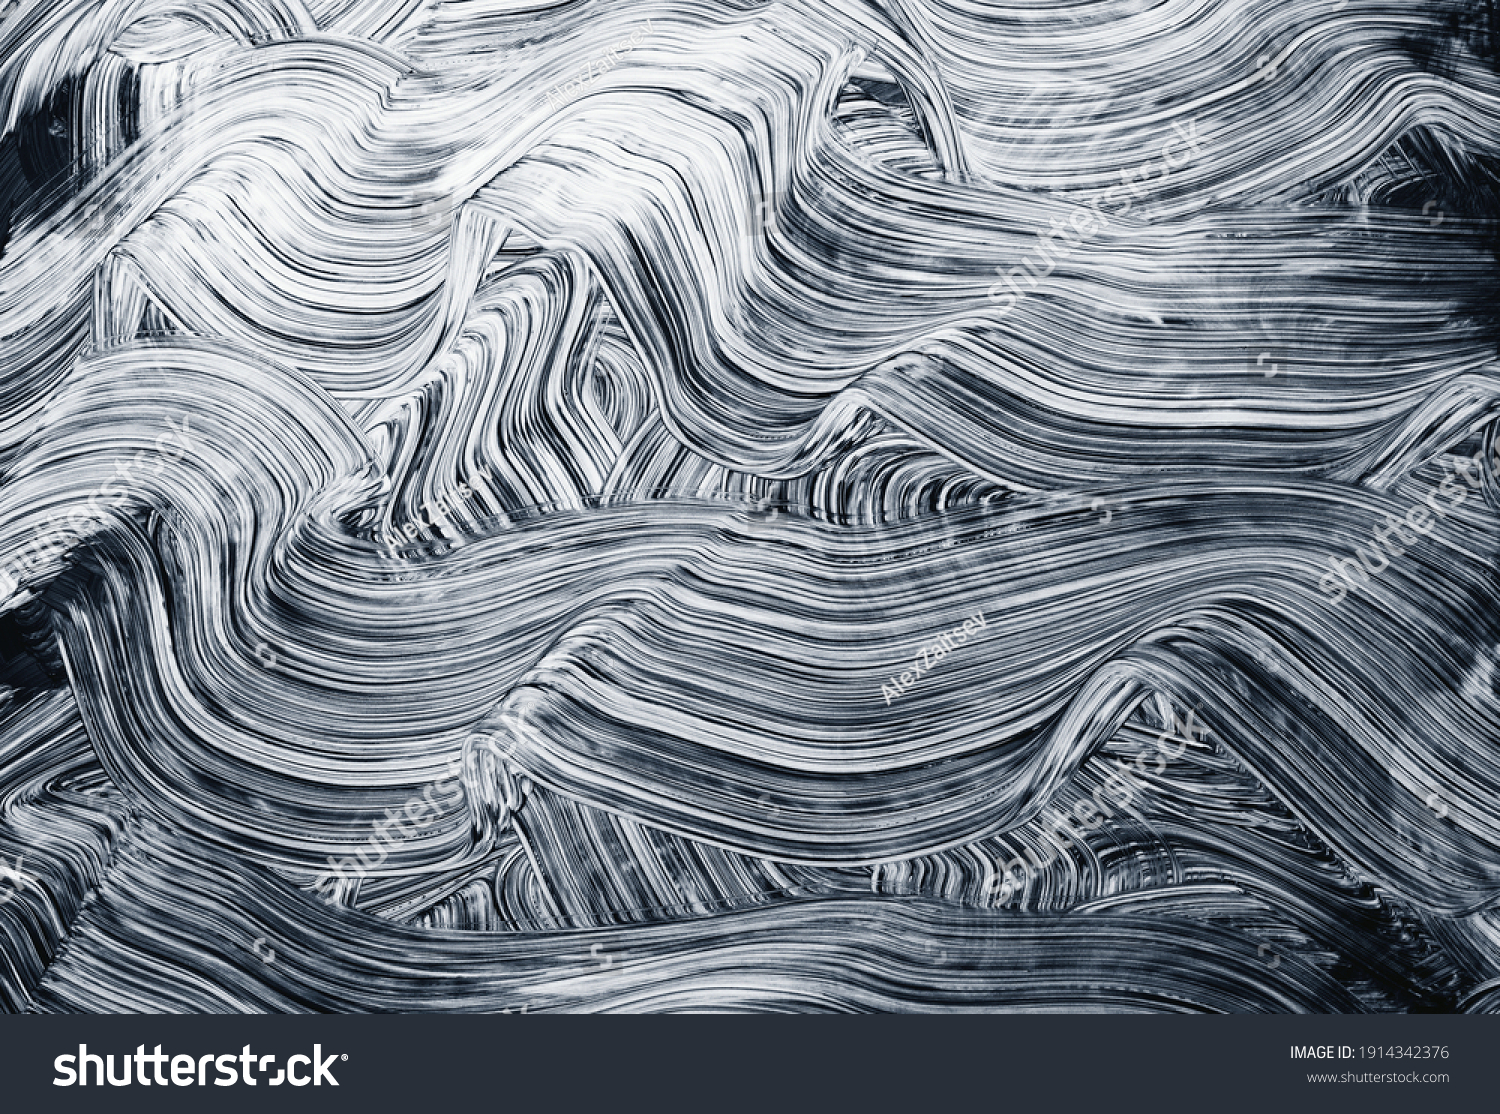 Brush strokes grunge abstract curves background, texture #1914342376